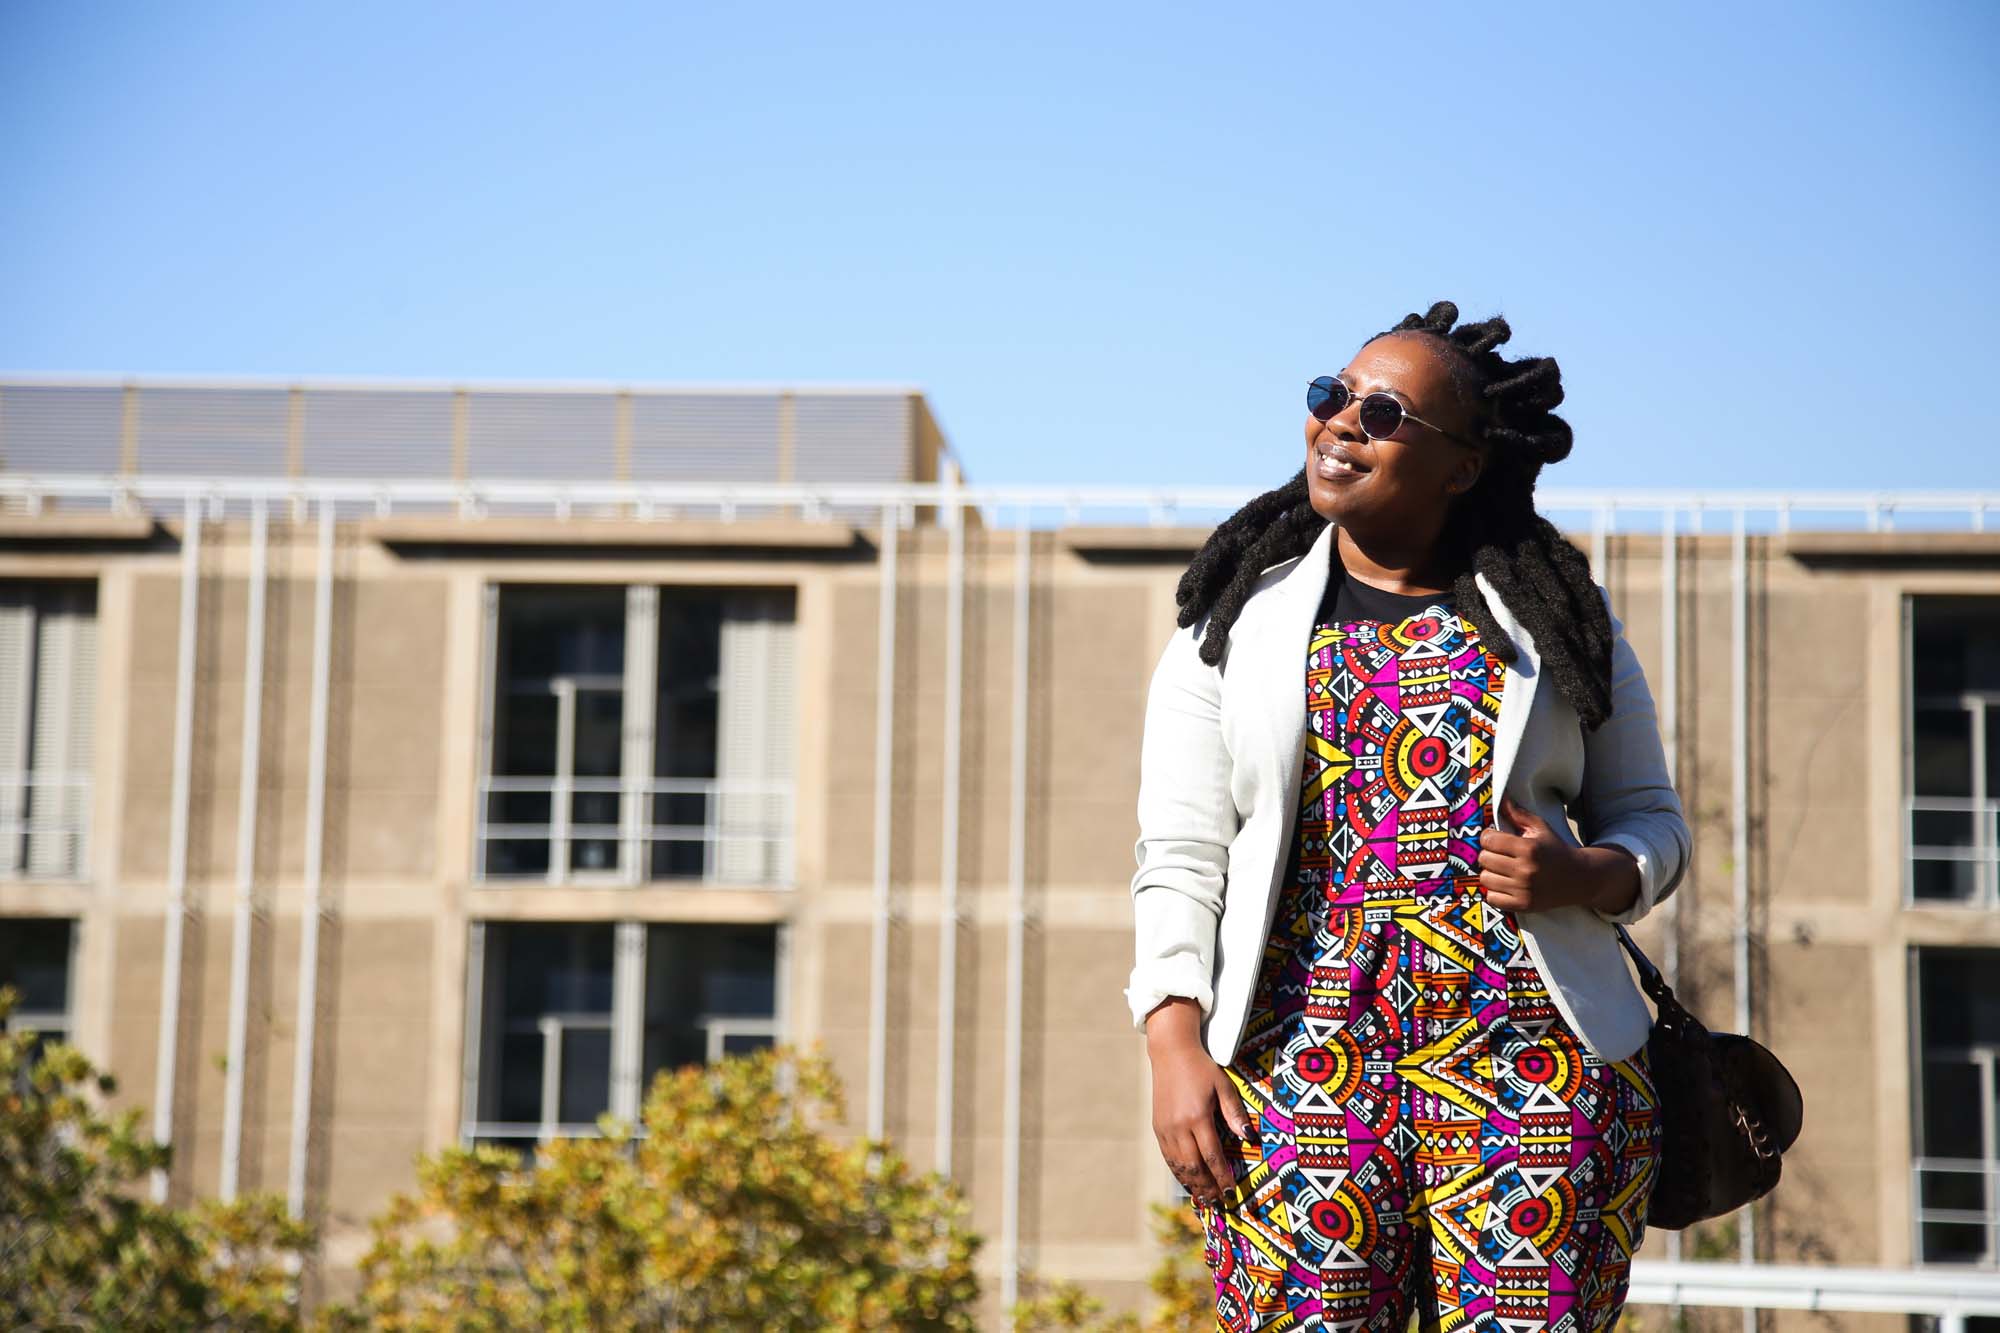 UCT Women&rsquo;s Month celebrated Neziswa Titi, a research psychologist at the Children&rsquo;s Institute. Photographed at the Faculty of Law&rsquo;s Kramer building on 3 August 2021.